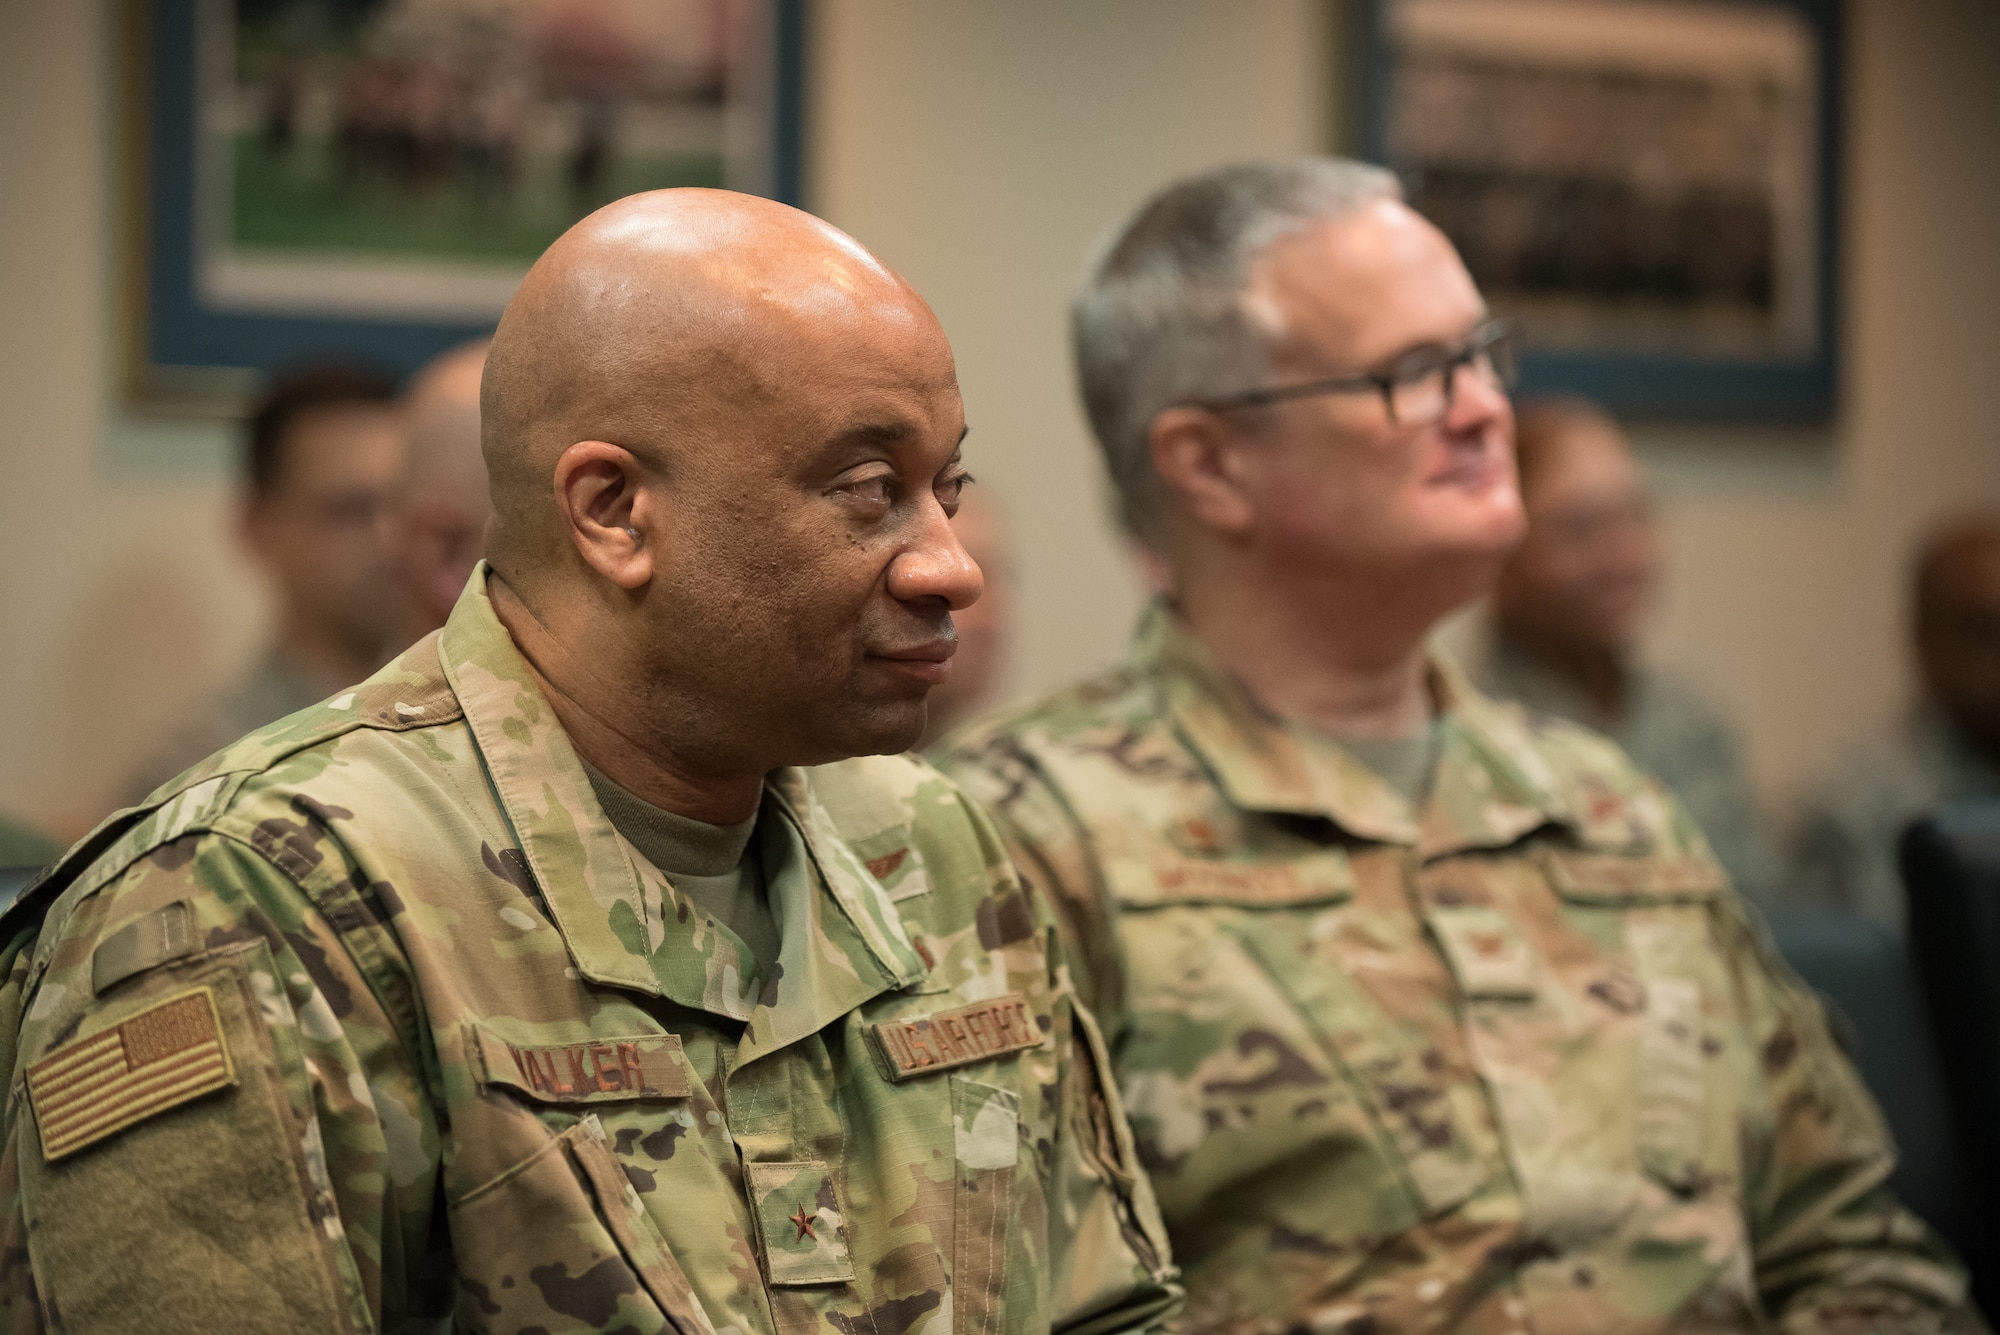 The Kentucky Air National Guard’s chief of staff, Brig. Gen. Charles Walker (left) and Col. David Mounkes, commander of the 123rd Airlift Wing, attend a ceremony at the Kentucky Air National Guard base in Louisville, Ky., Aug. 10, 2019, during which Brig. Gen. Warren Hurst, Kentucky’s assistant adjutant general for Air, was awarded the Distinguished Service Medal. The honor recognizes exceptionally meritorious service in duties of great responsibility. (U.S. Air National Guard photo by Dale Greer)